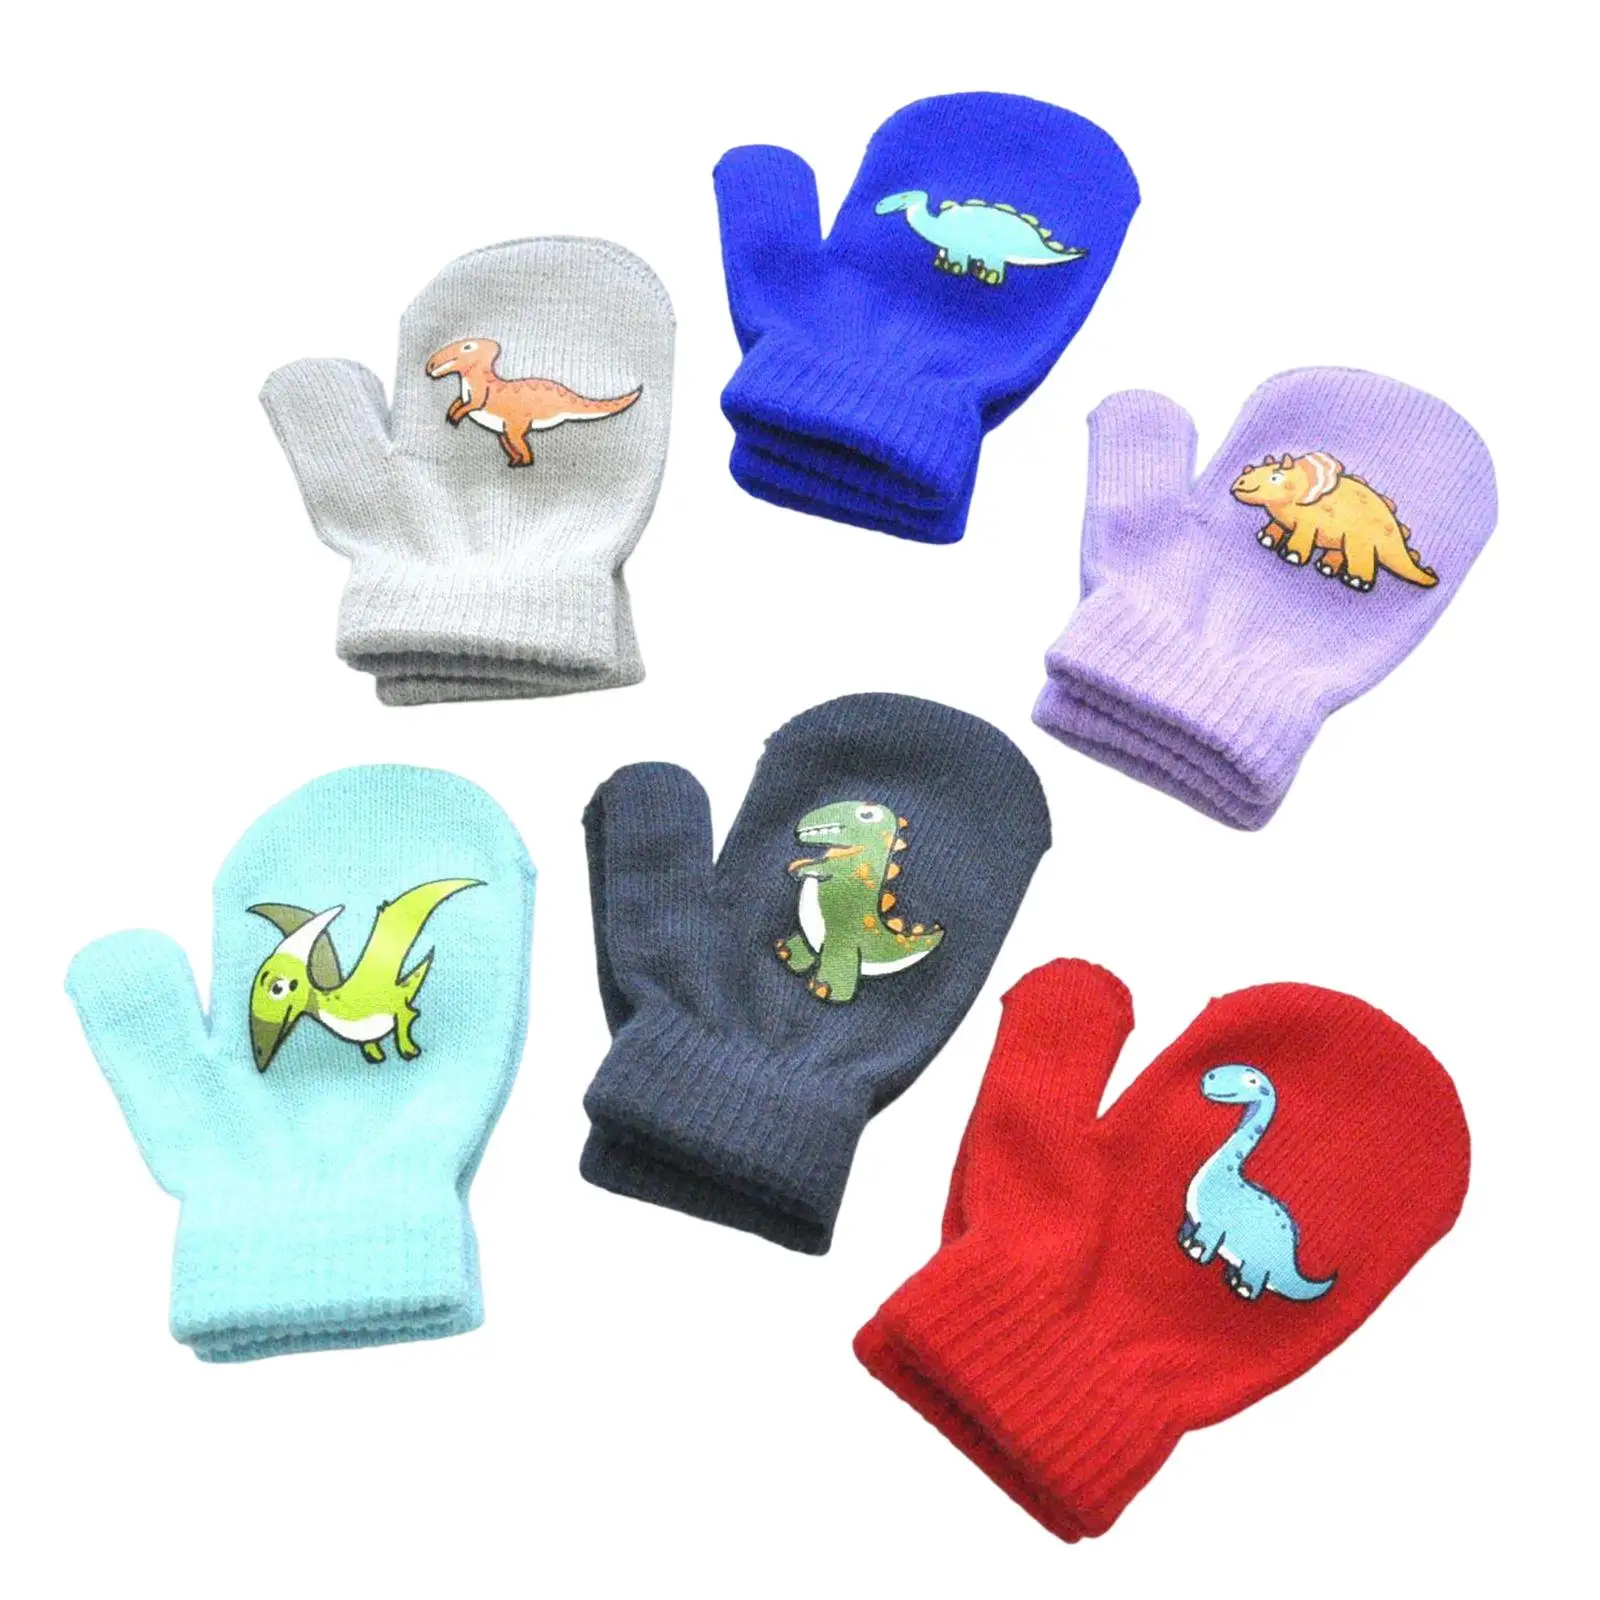 6x Children Winter Gloves Dinosaurs Pattern Full Fingers for Indoor and Outdoor Activities Warm Cute Appearance Assorted Color